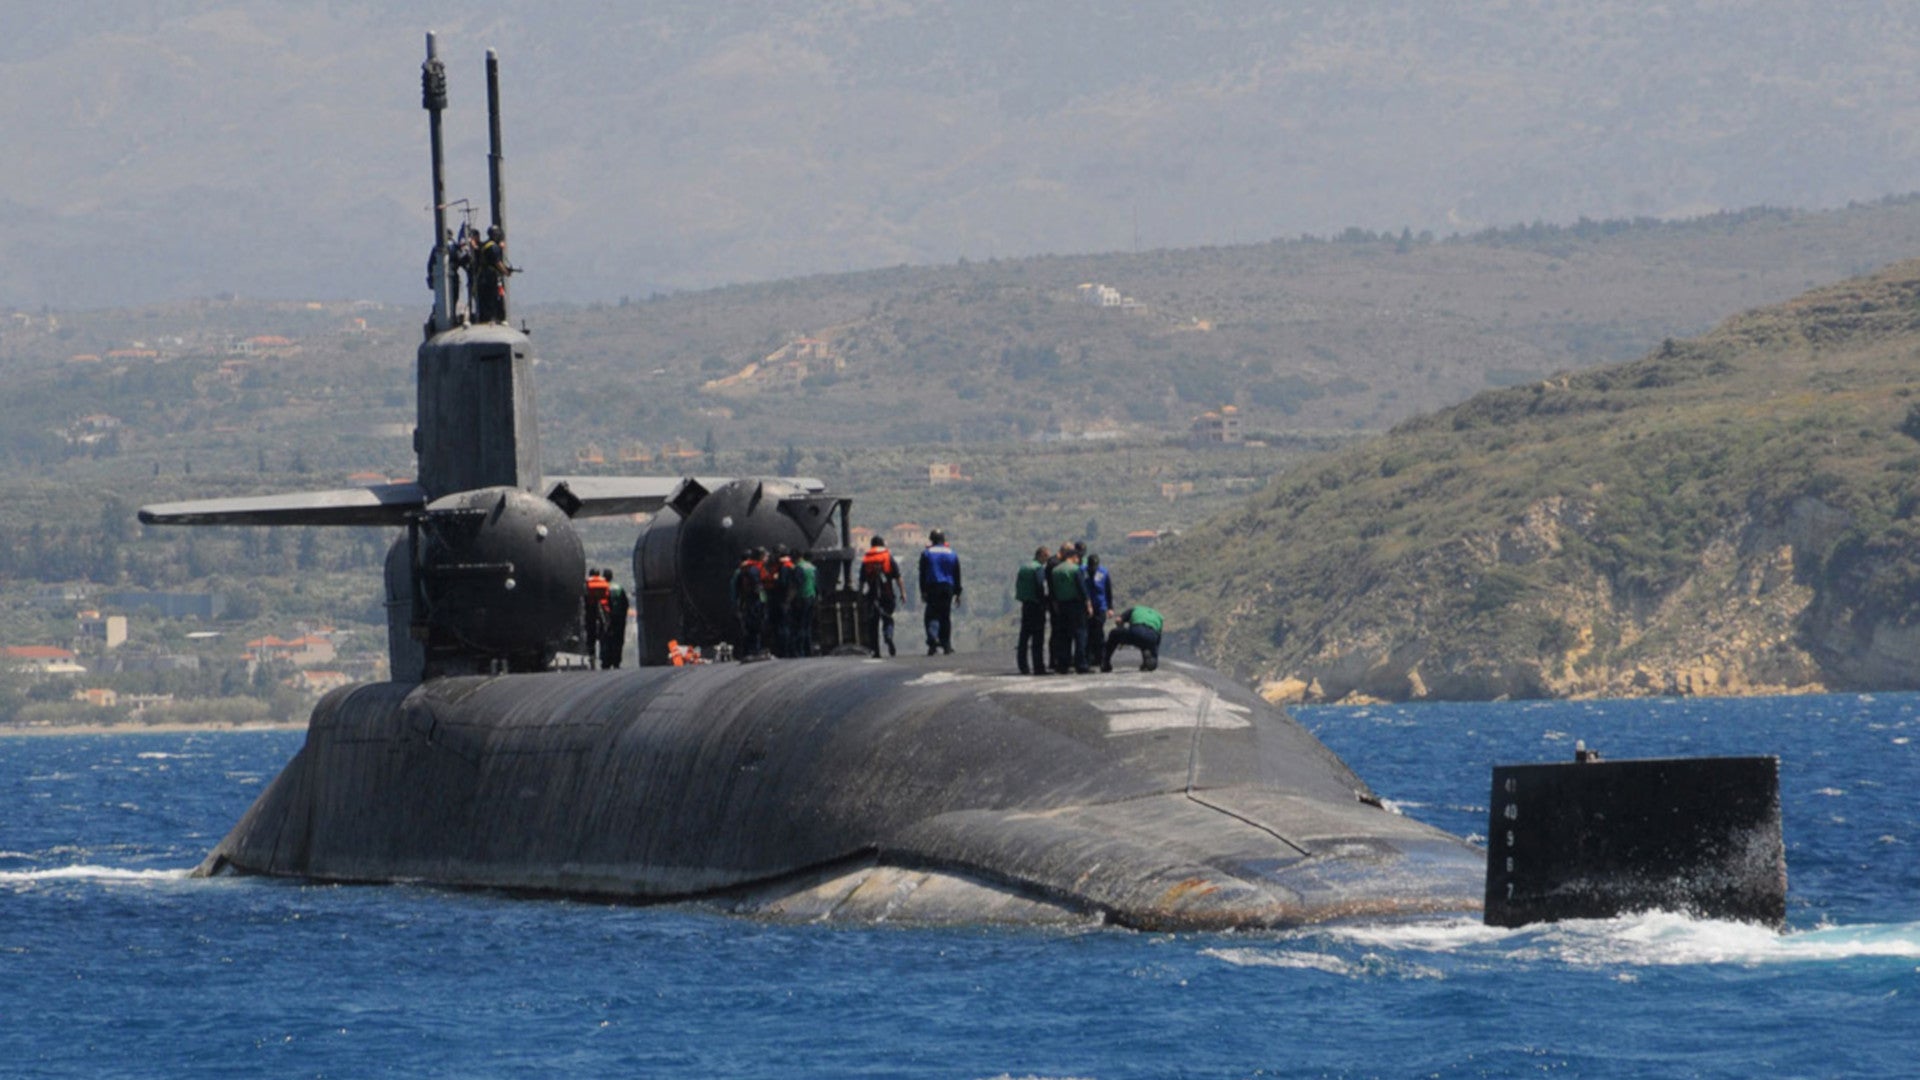 Navy Plans For ‘Large Payload Subs’ Based On New Columbia Class To Take On SSGN Role And More